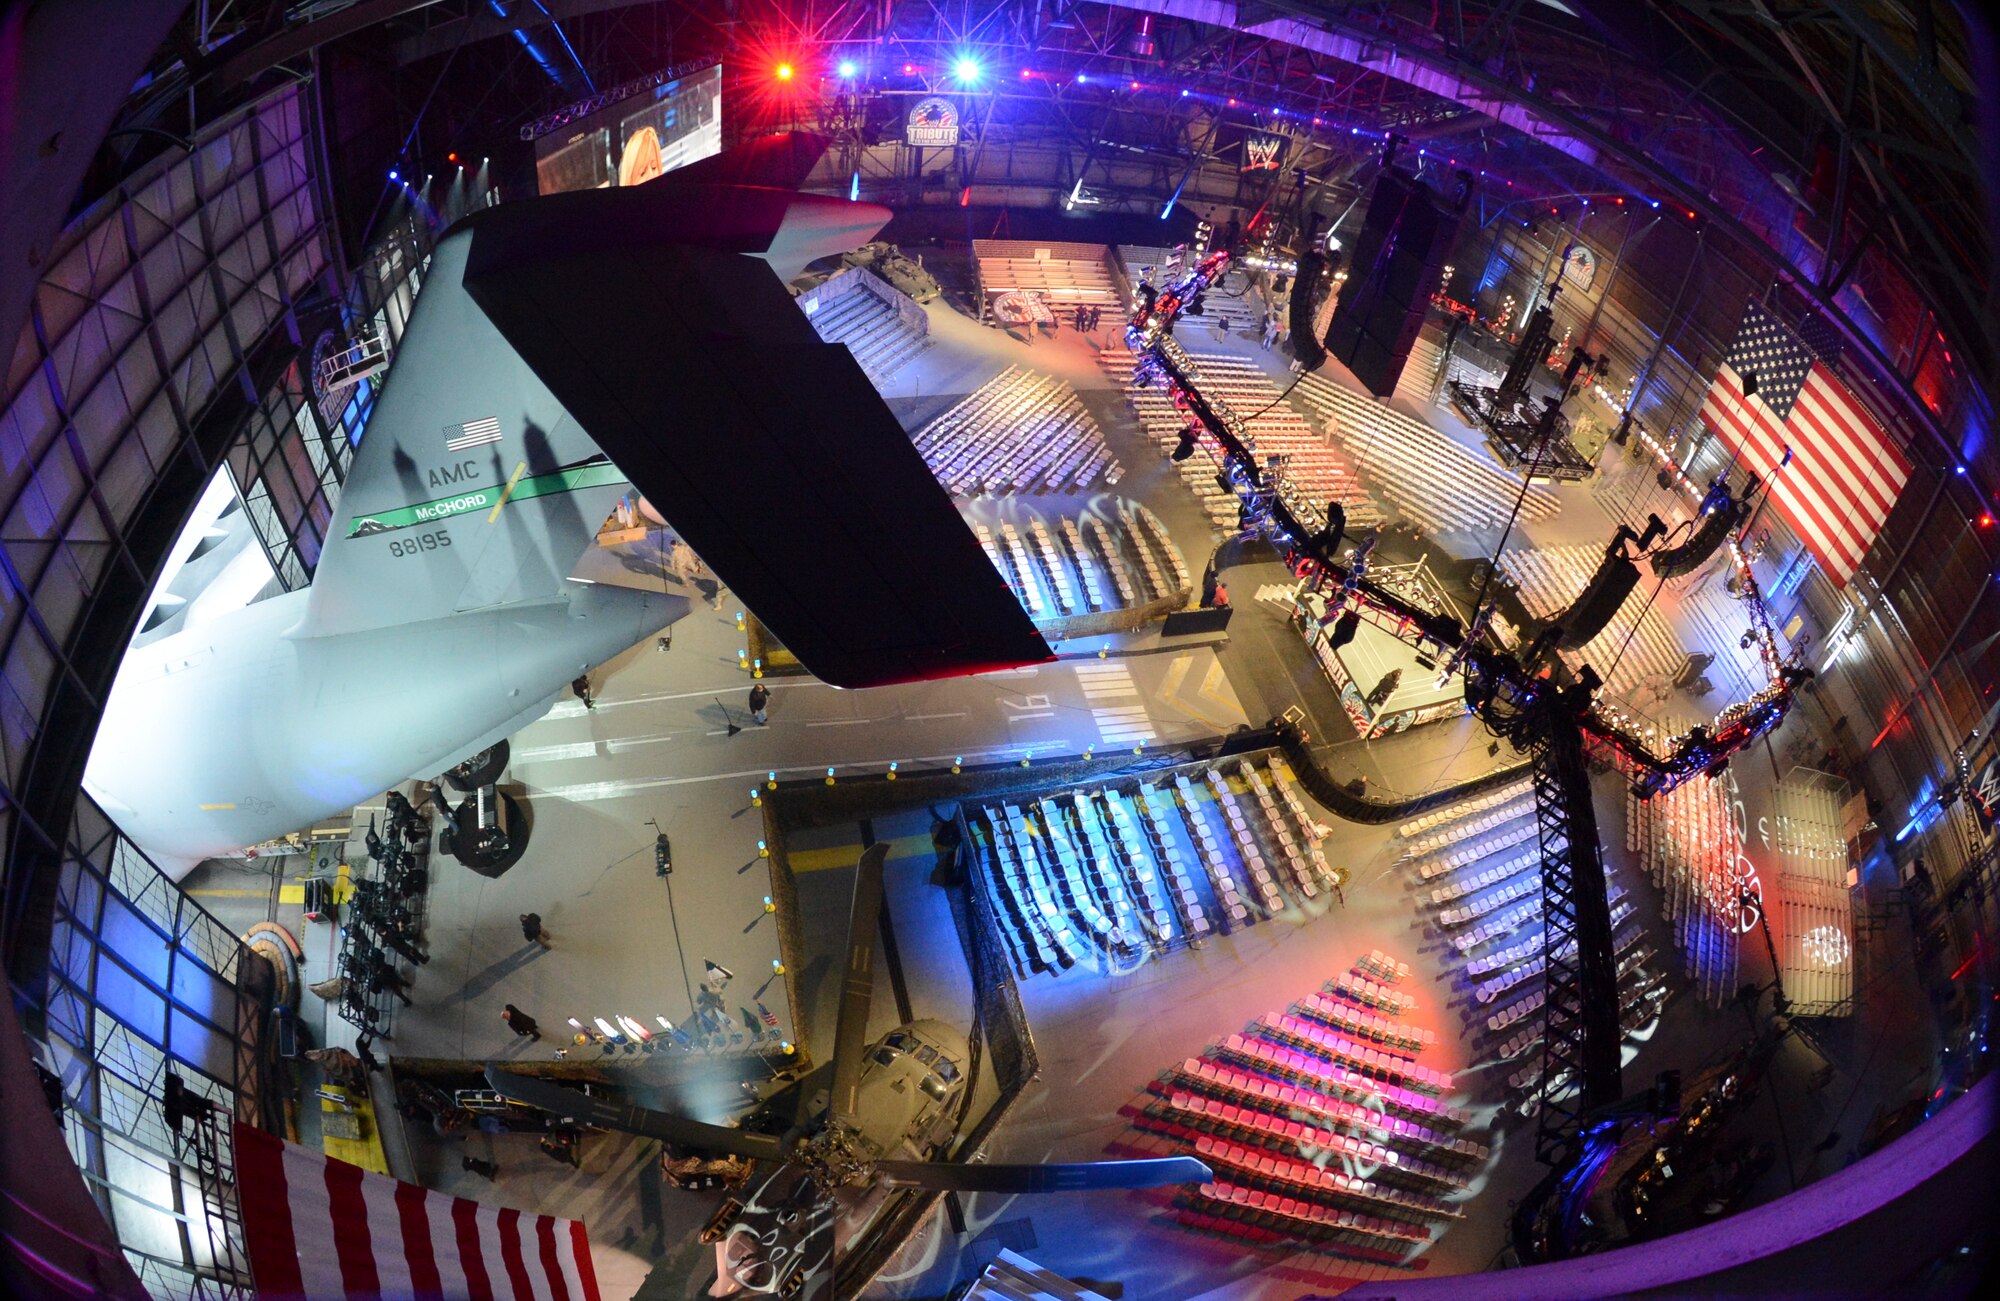 A final check of lighting and sound is performed prior to opening the doors to ticket holders, Dec. 11, 2013, at the WWE Tribute to the Troops event at Joint Base Lewis-McChord, Wash. McChord Field's hangar four was transformed into a wrestling arena in which 4,000 service members and family members were treated to a free show which included live music and comedy performance interspersed among wrestling matches. (U.S. Air Force photo/Tech. Sgt. Sean Tobin)